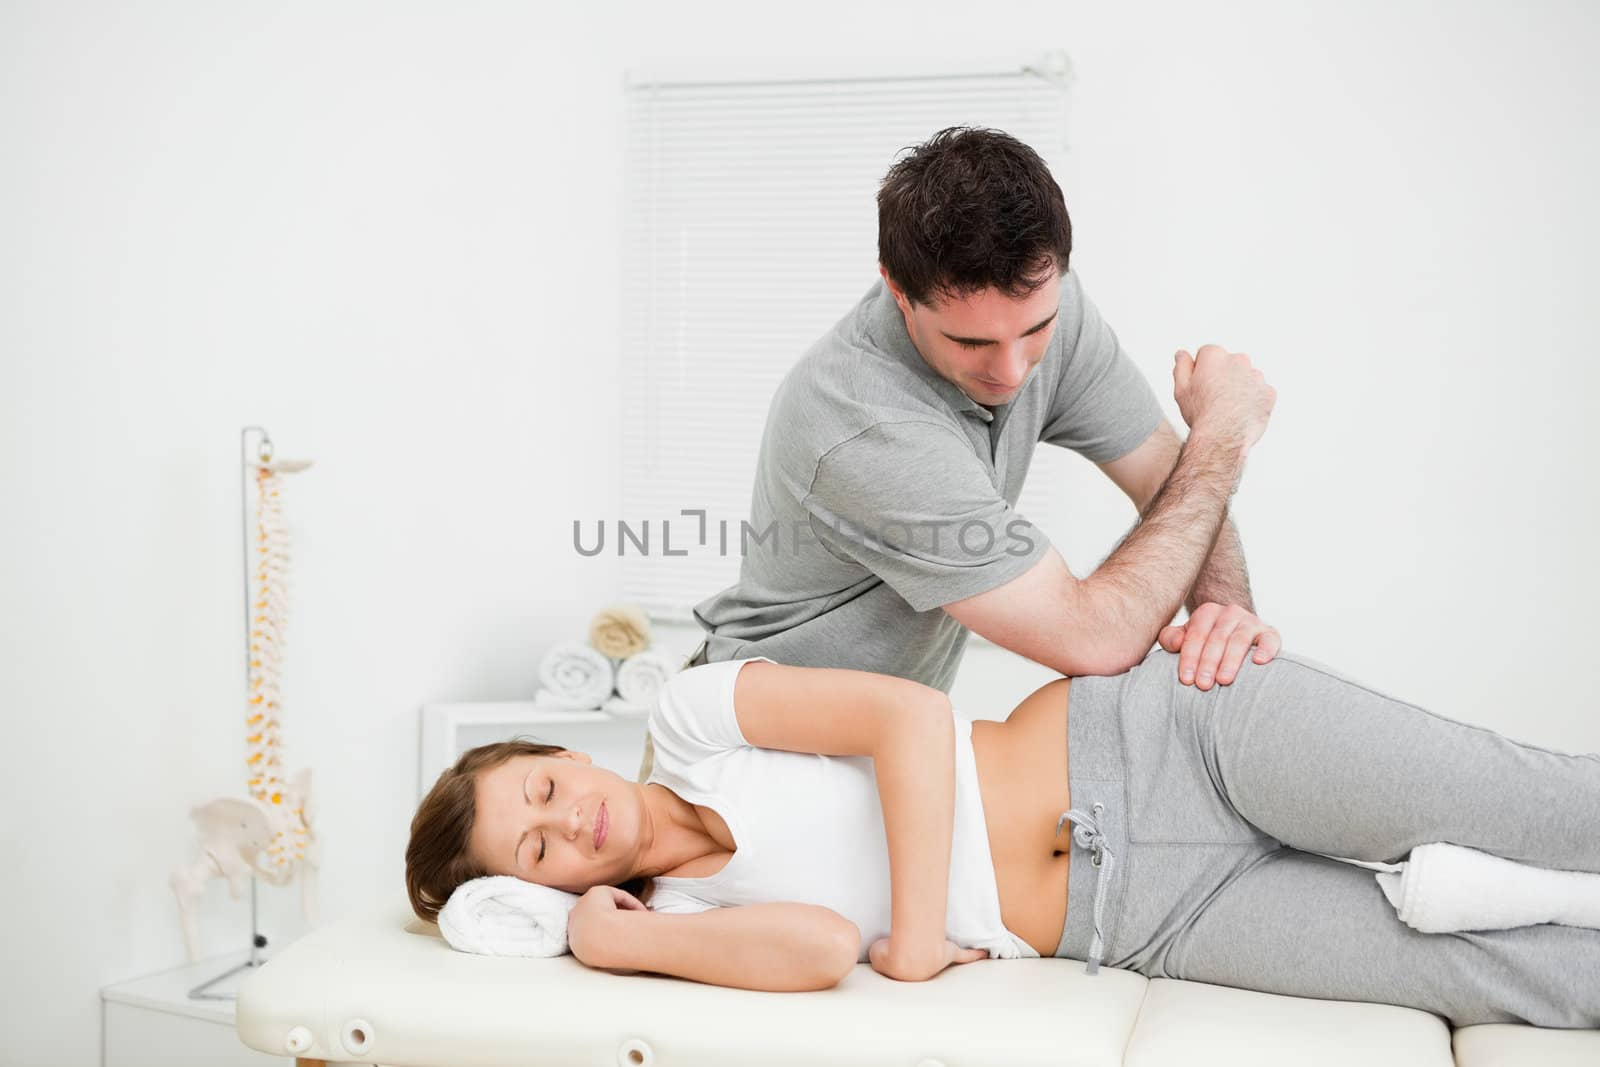 Doctor using his elbow to massage the hip of a woman by Wavebreakmedia